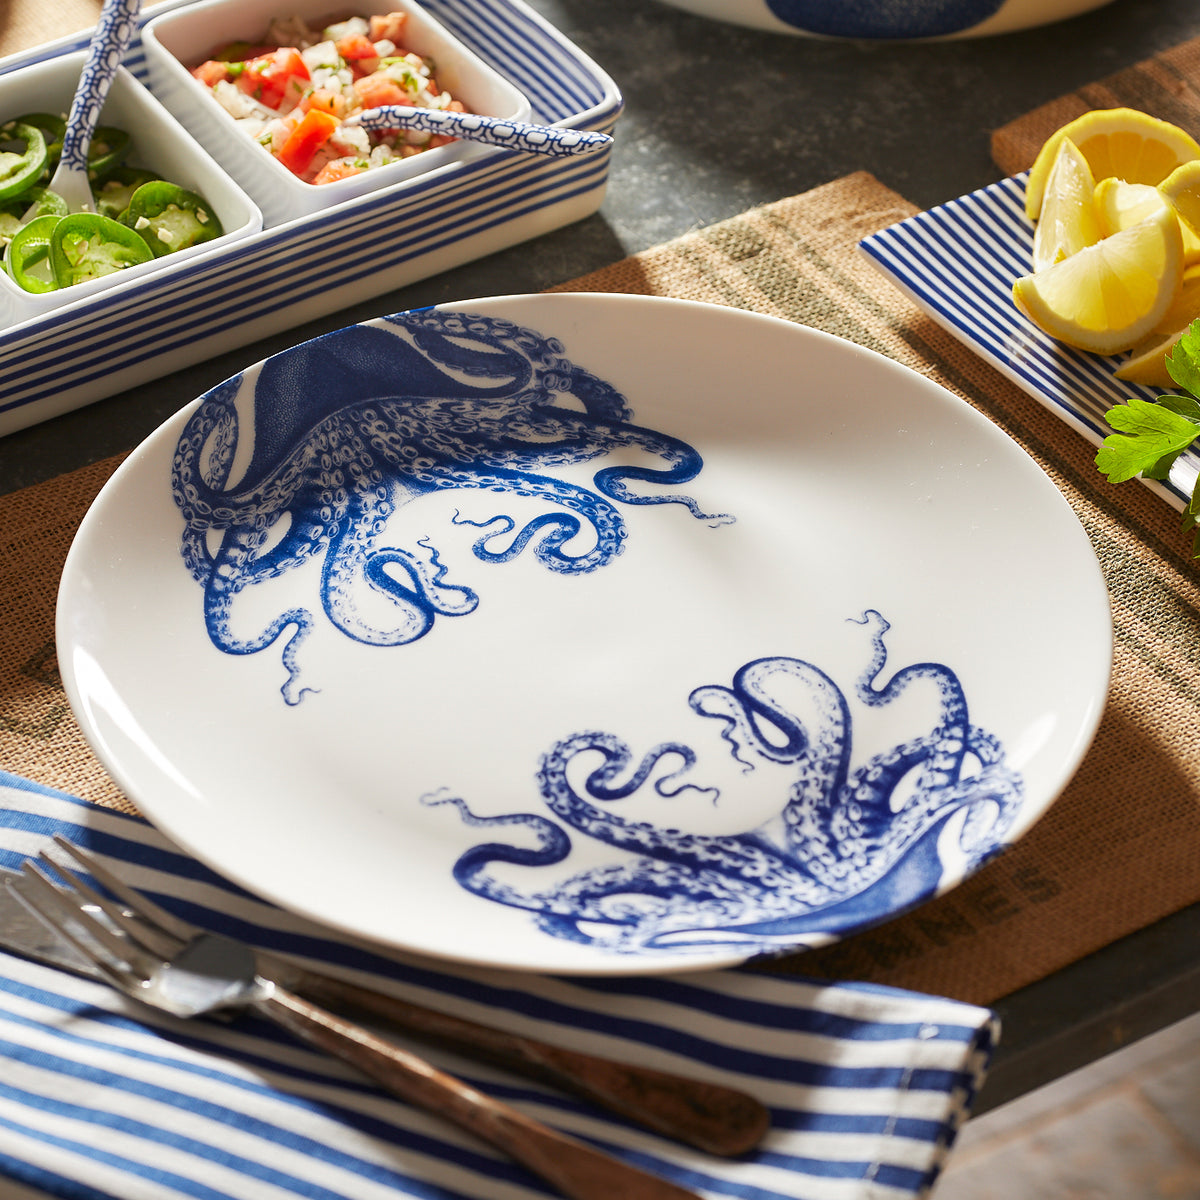 A creamy white premium porcelain Lucy Coupe Dinner Plate by Caskata Artisanal Home with a blue Lucy the octopus design is set on a table with a blue and white striped napkin, fork, knife, and bowls of lemon, sliced jalapenos, and diced vegetables.